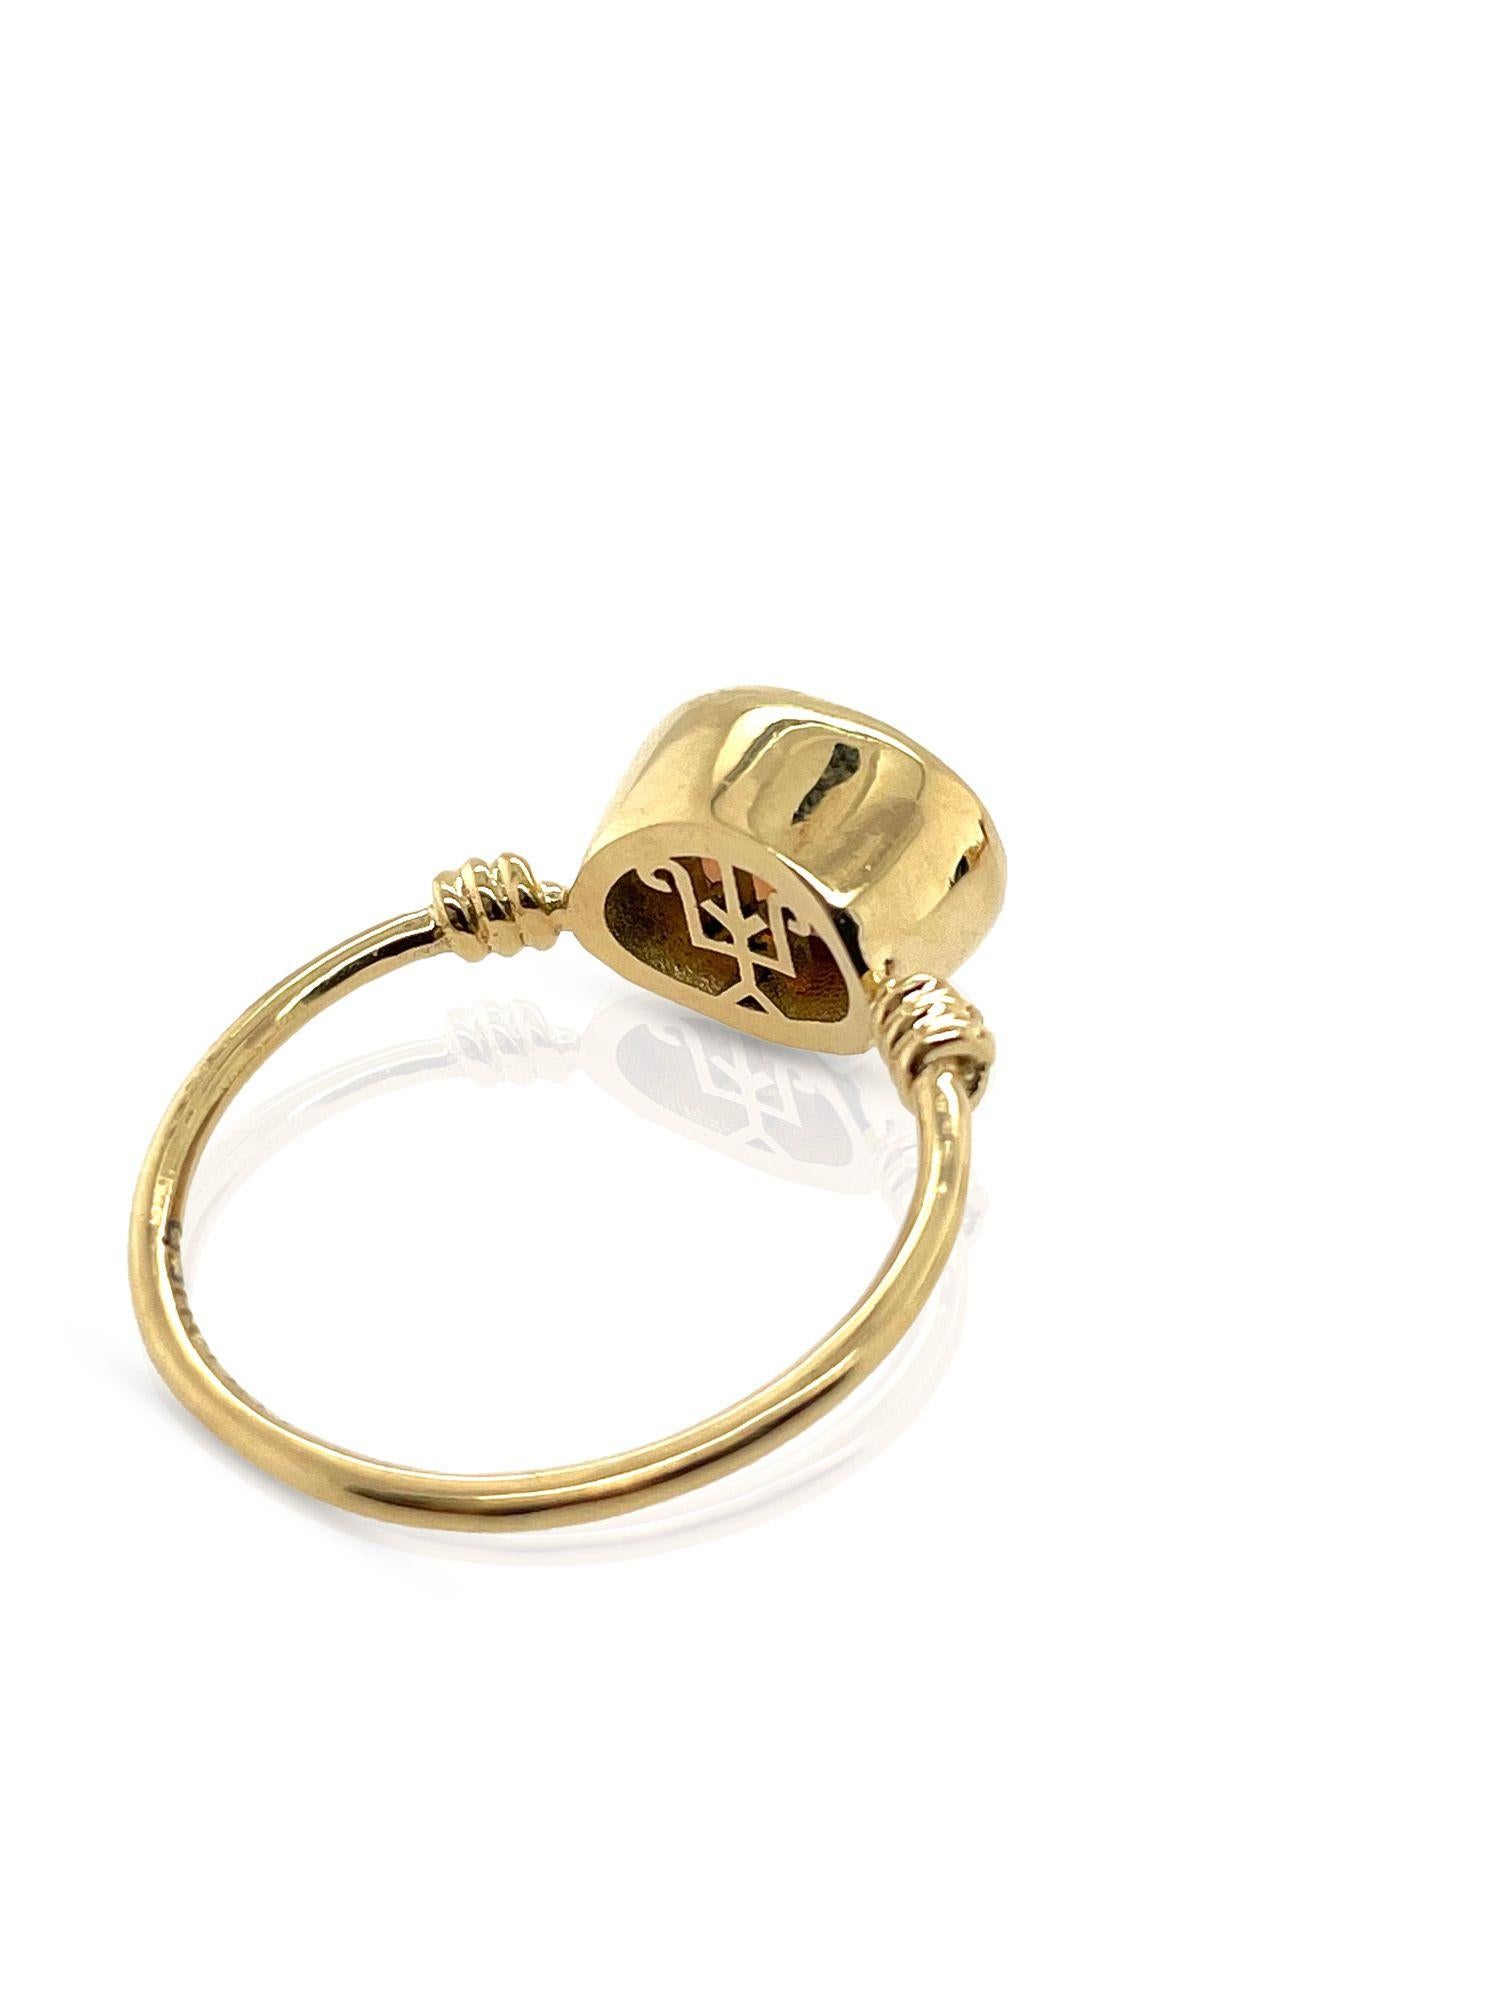 Size L AUD/UK

*Can be resized at request*

Bold colour, subtle curves and sculptural form. The love knot is a modern take on an ancient symbol of eternal love once favoured among European aristocrats. Stack your rings to elevate your style and